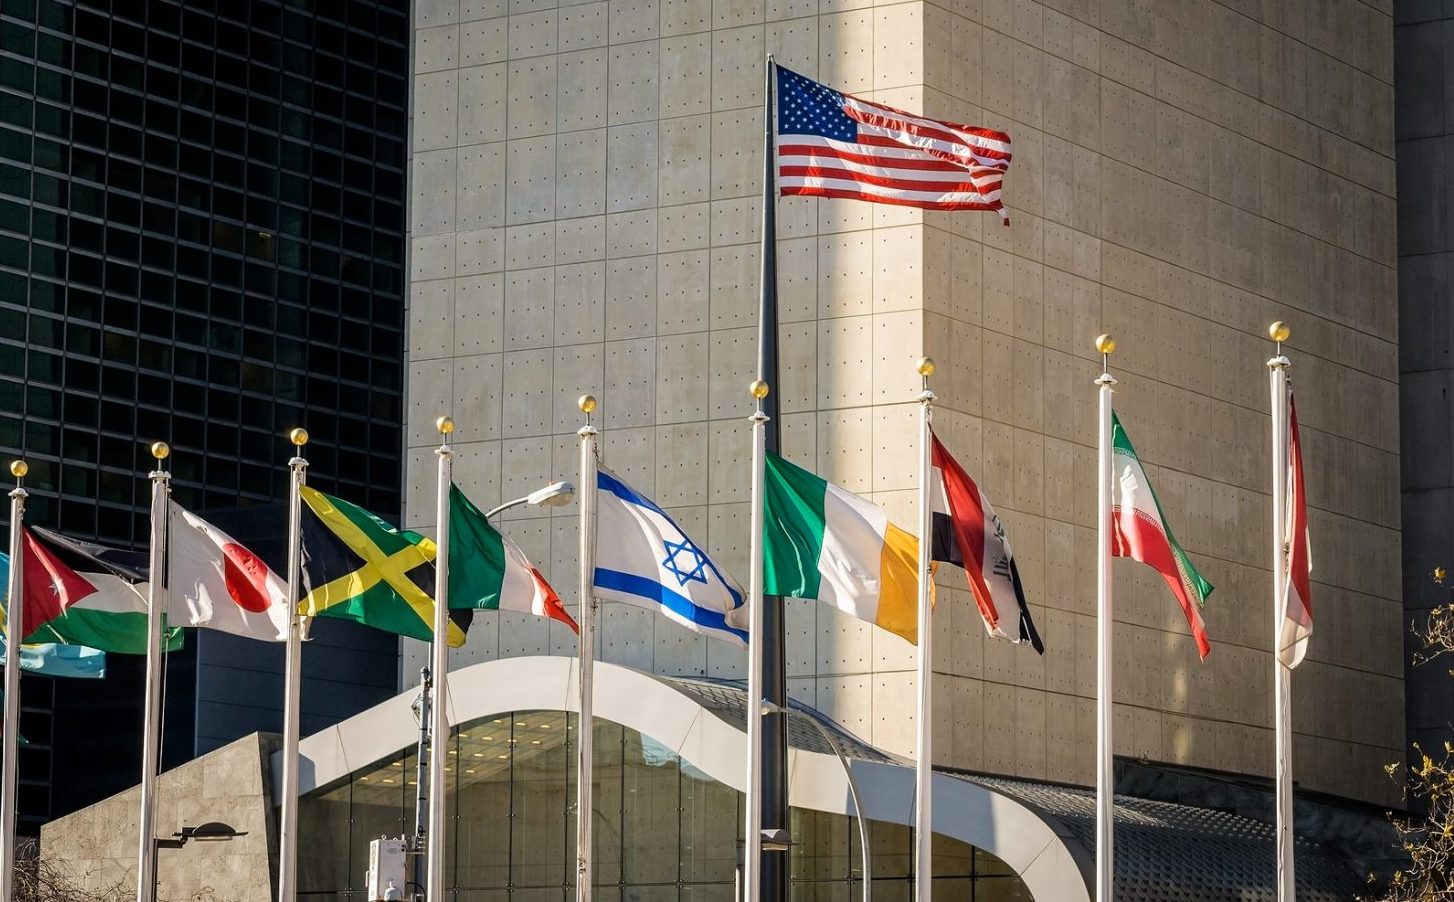 Flags of the world with the United States and Israel displayed prominently.